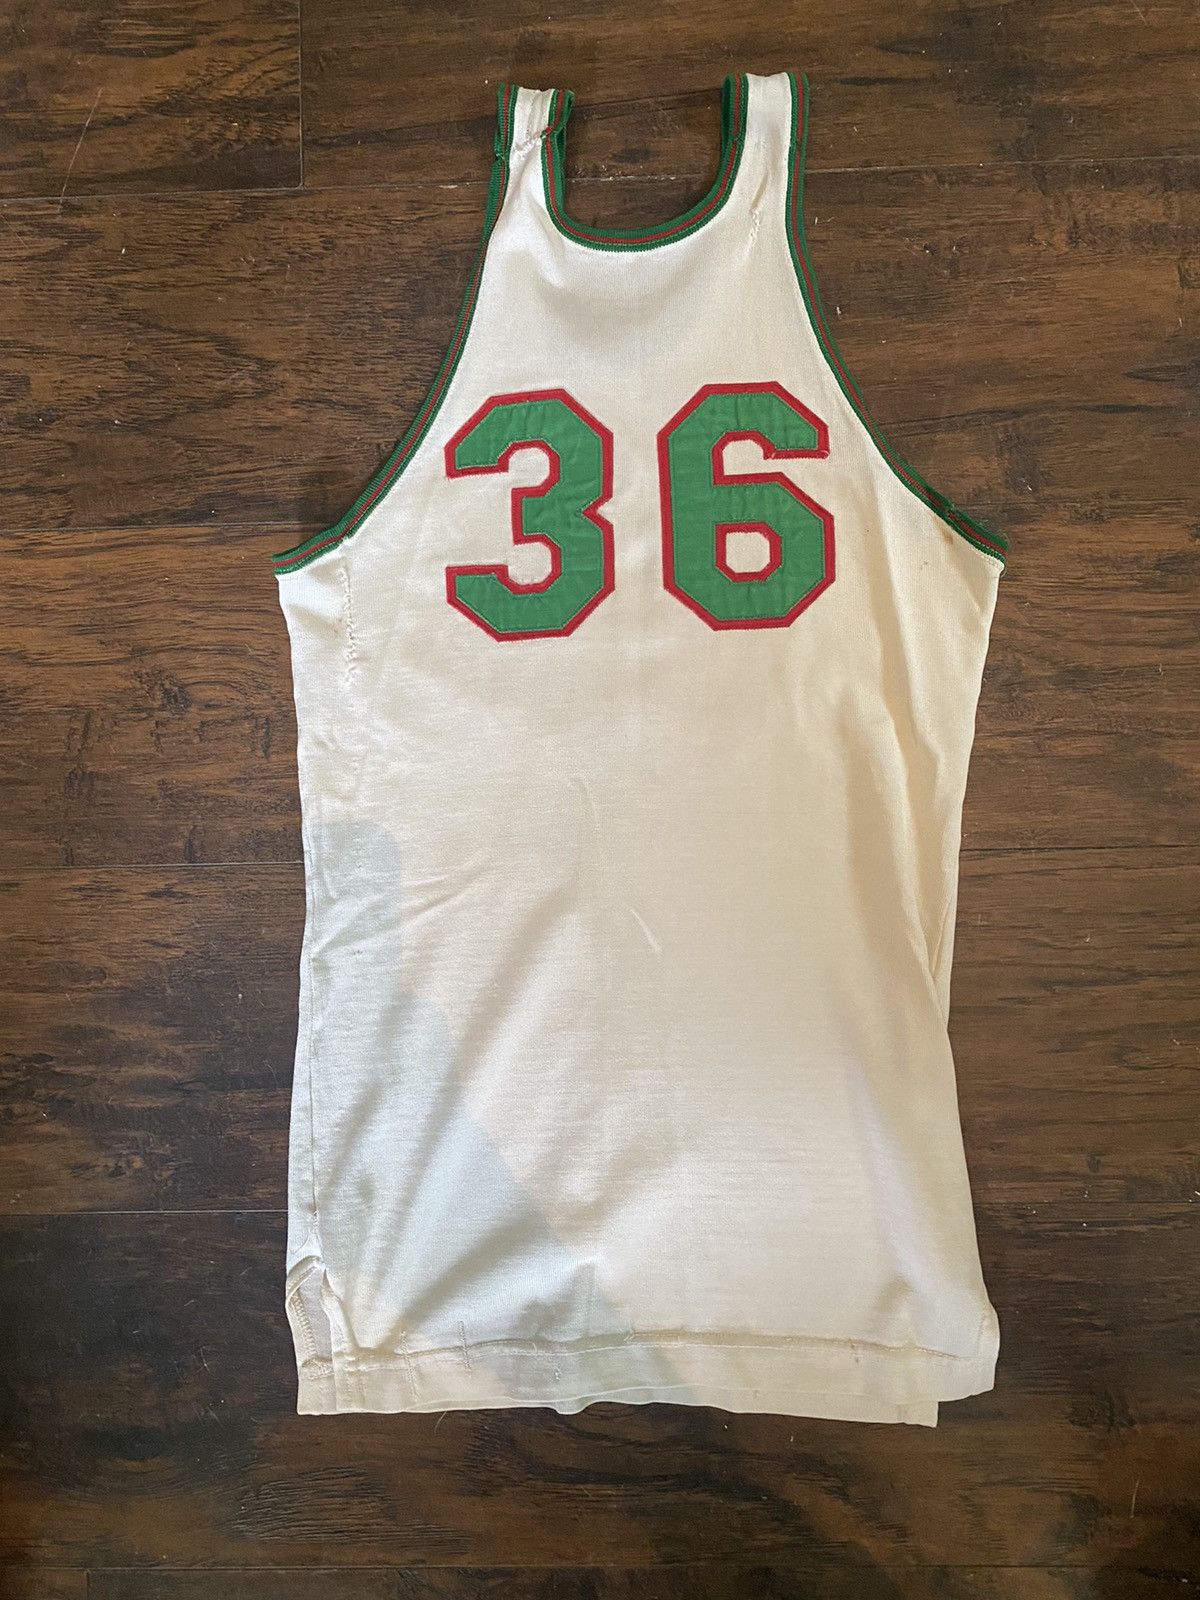 Vintage 1950s Rawlings Basketball Jersey Wolves 36 Size US L / EU 52-54 / 3 - 3 Preview